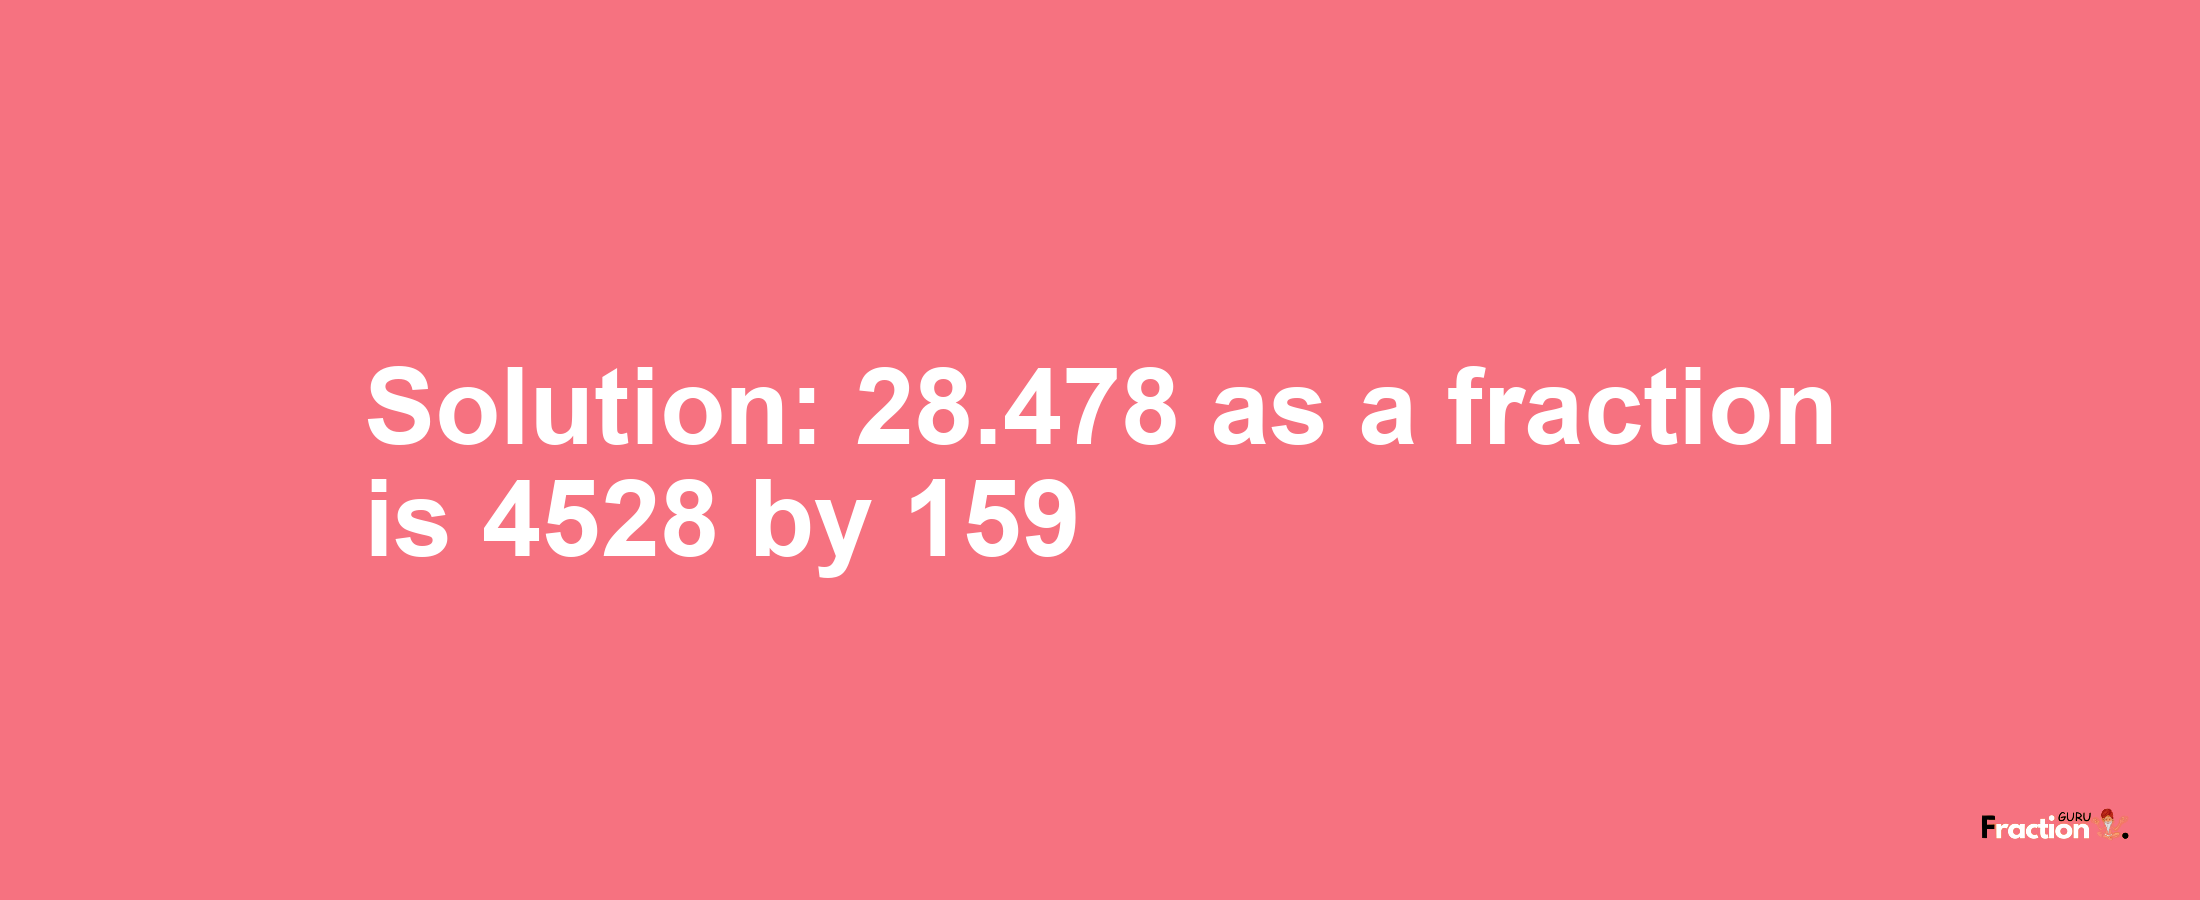 Solution:28.478 as a fraction is 4528/159